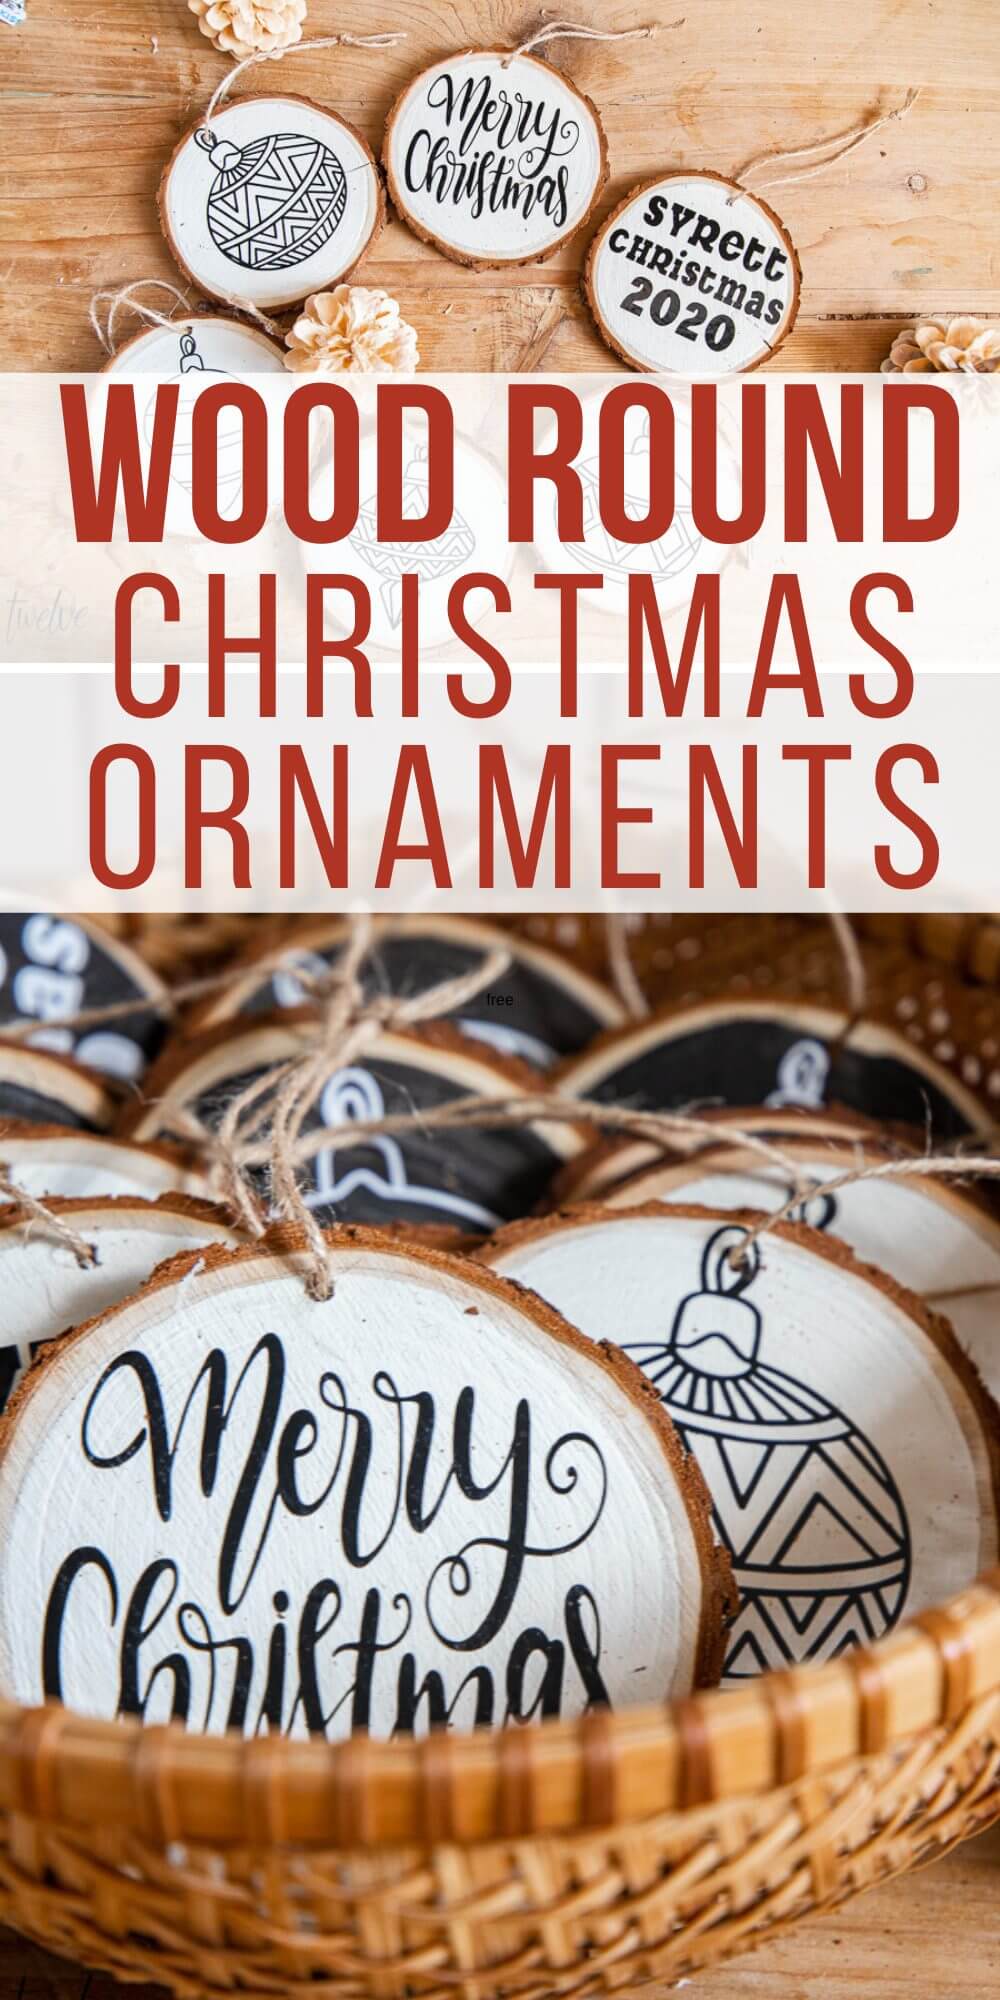 Want personalized Holiday gift ideas? How about some cute personalized Christmas ornaments that you can make with a Cricut machine. I made these cute Christmas ornaments using wood rounds, and created the designs that were cut on my Cricut Maker.